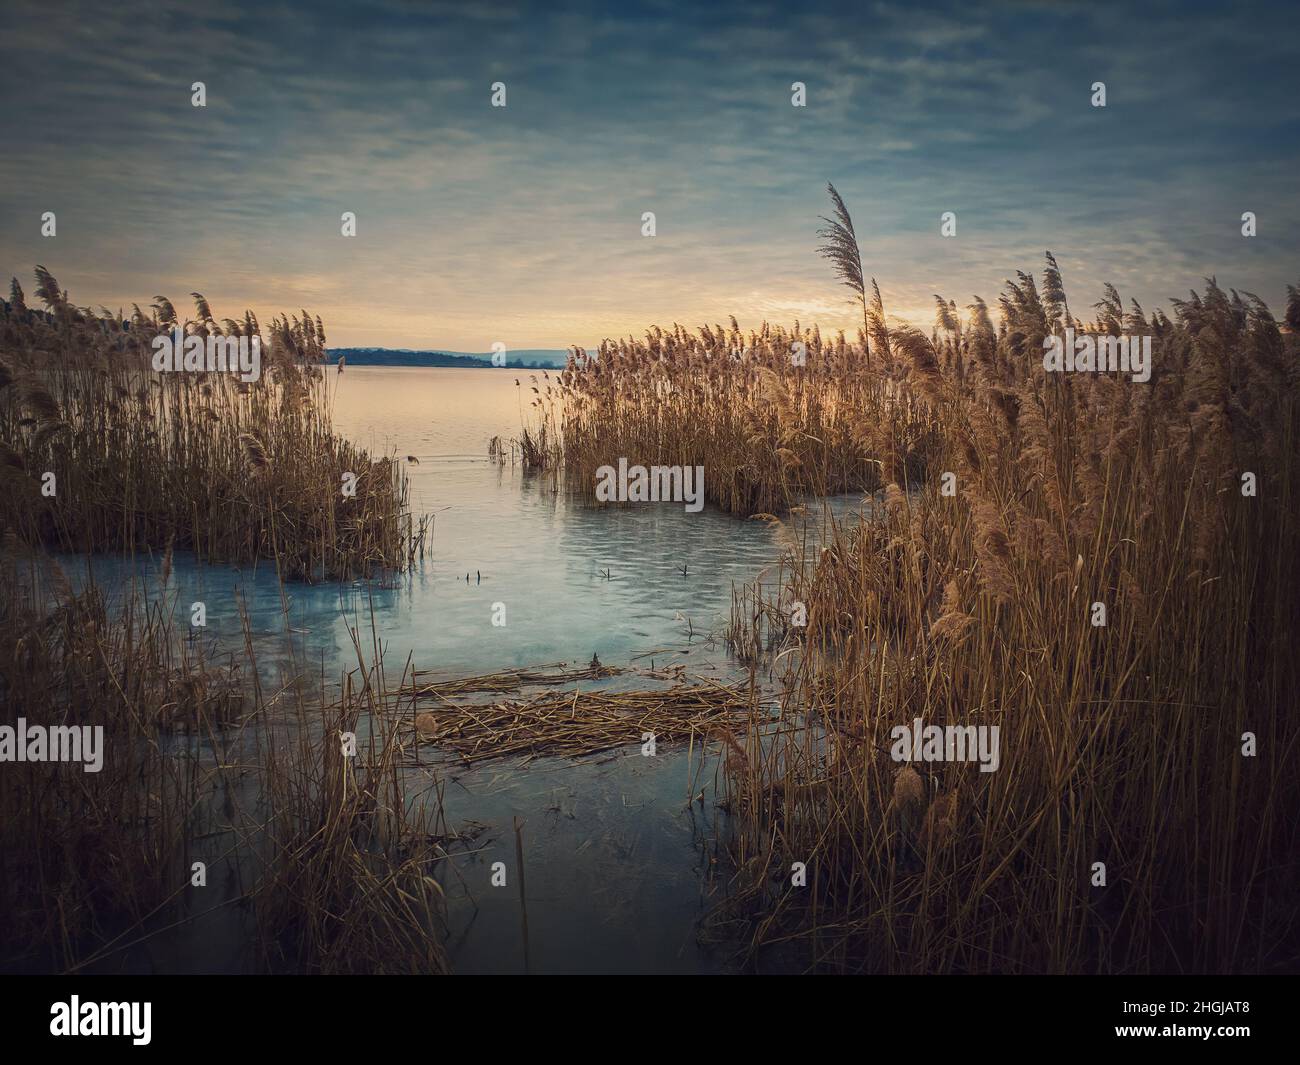 Dry reed in the frozen lake over sunset sky background. Winter landscape near pond, silent evening scene Stock Photo